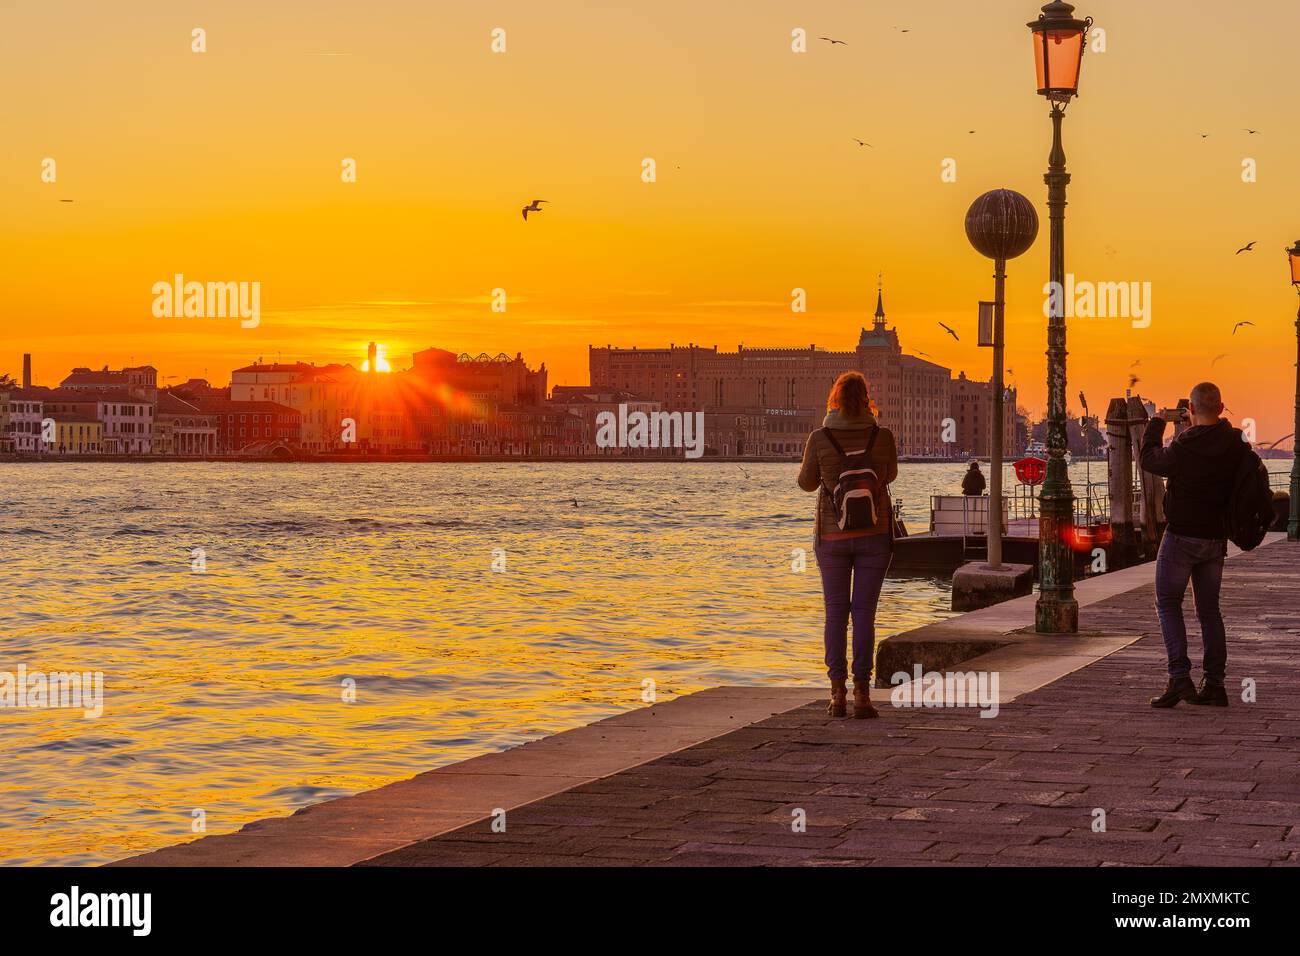 Venice, Italy - March 01, 2022: Sunset view of the Giudecca Island, with various monuments, and tourists, in Venice, Veneto, Northern Italy Stock Photo